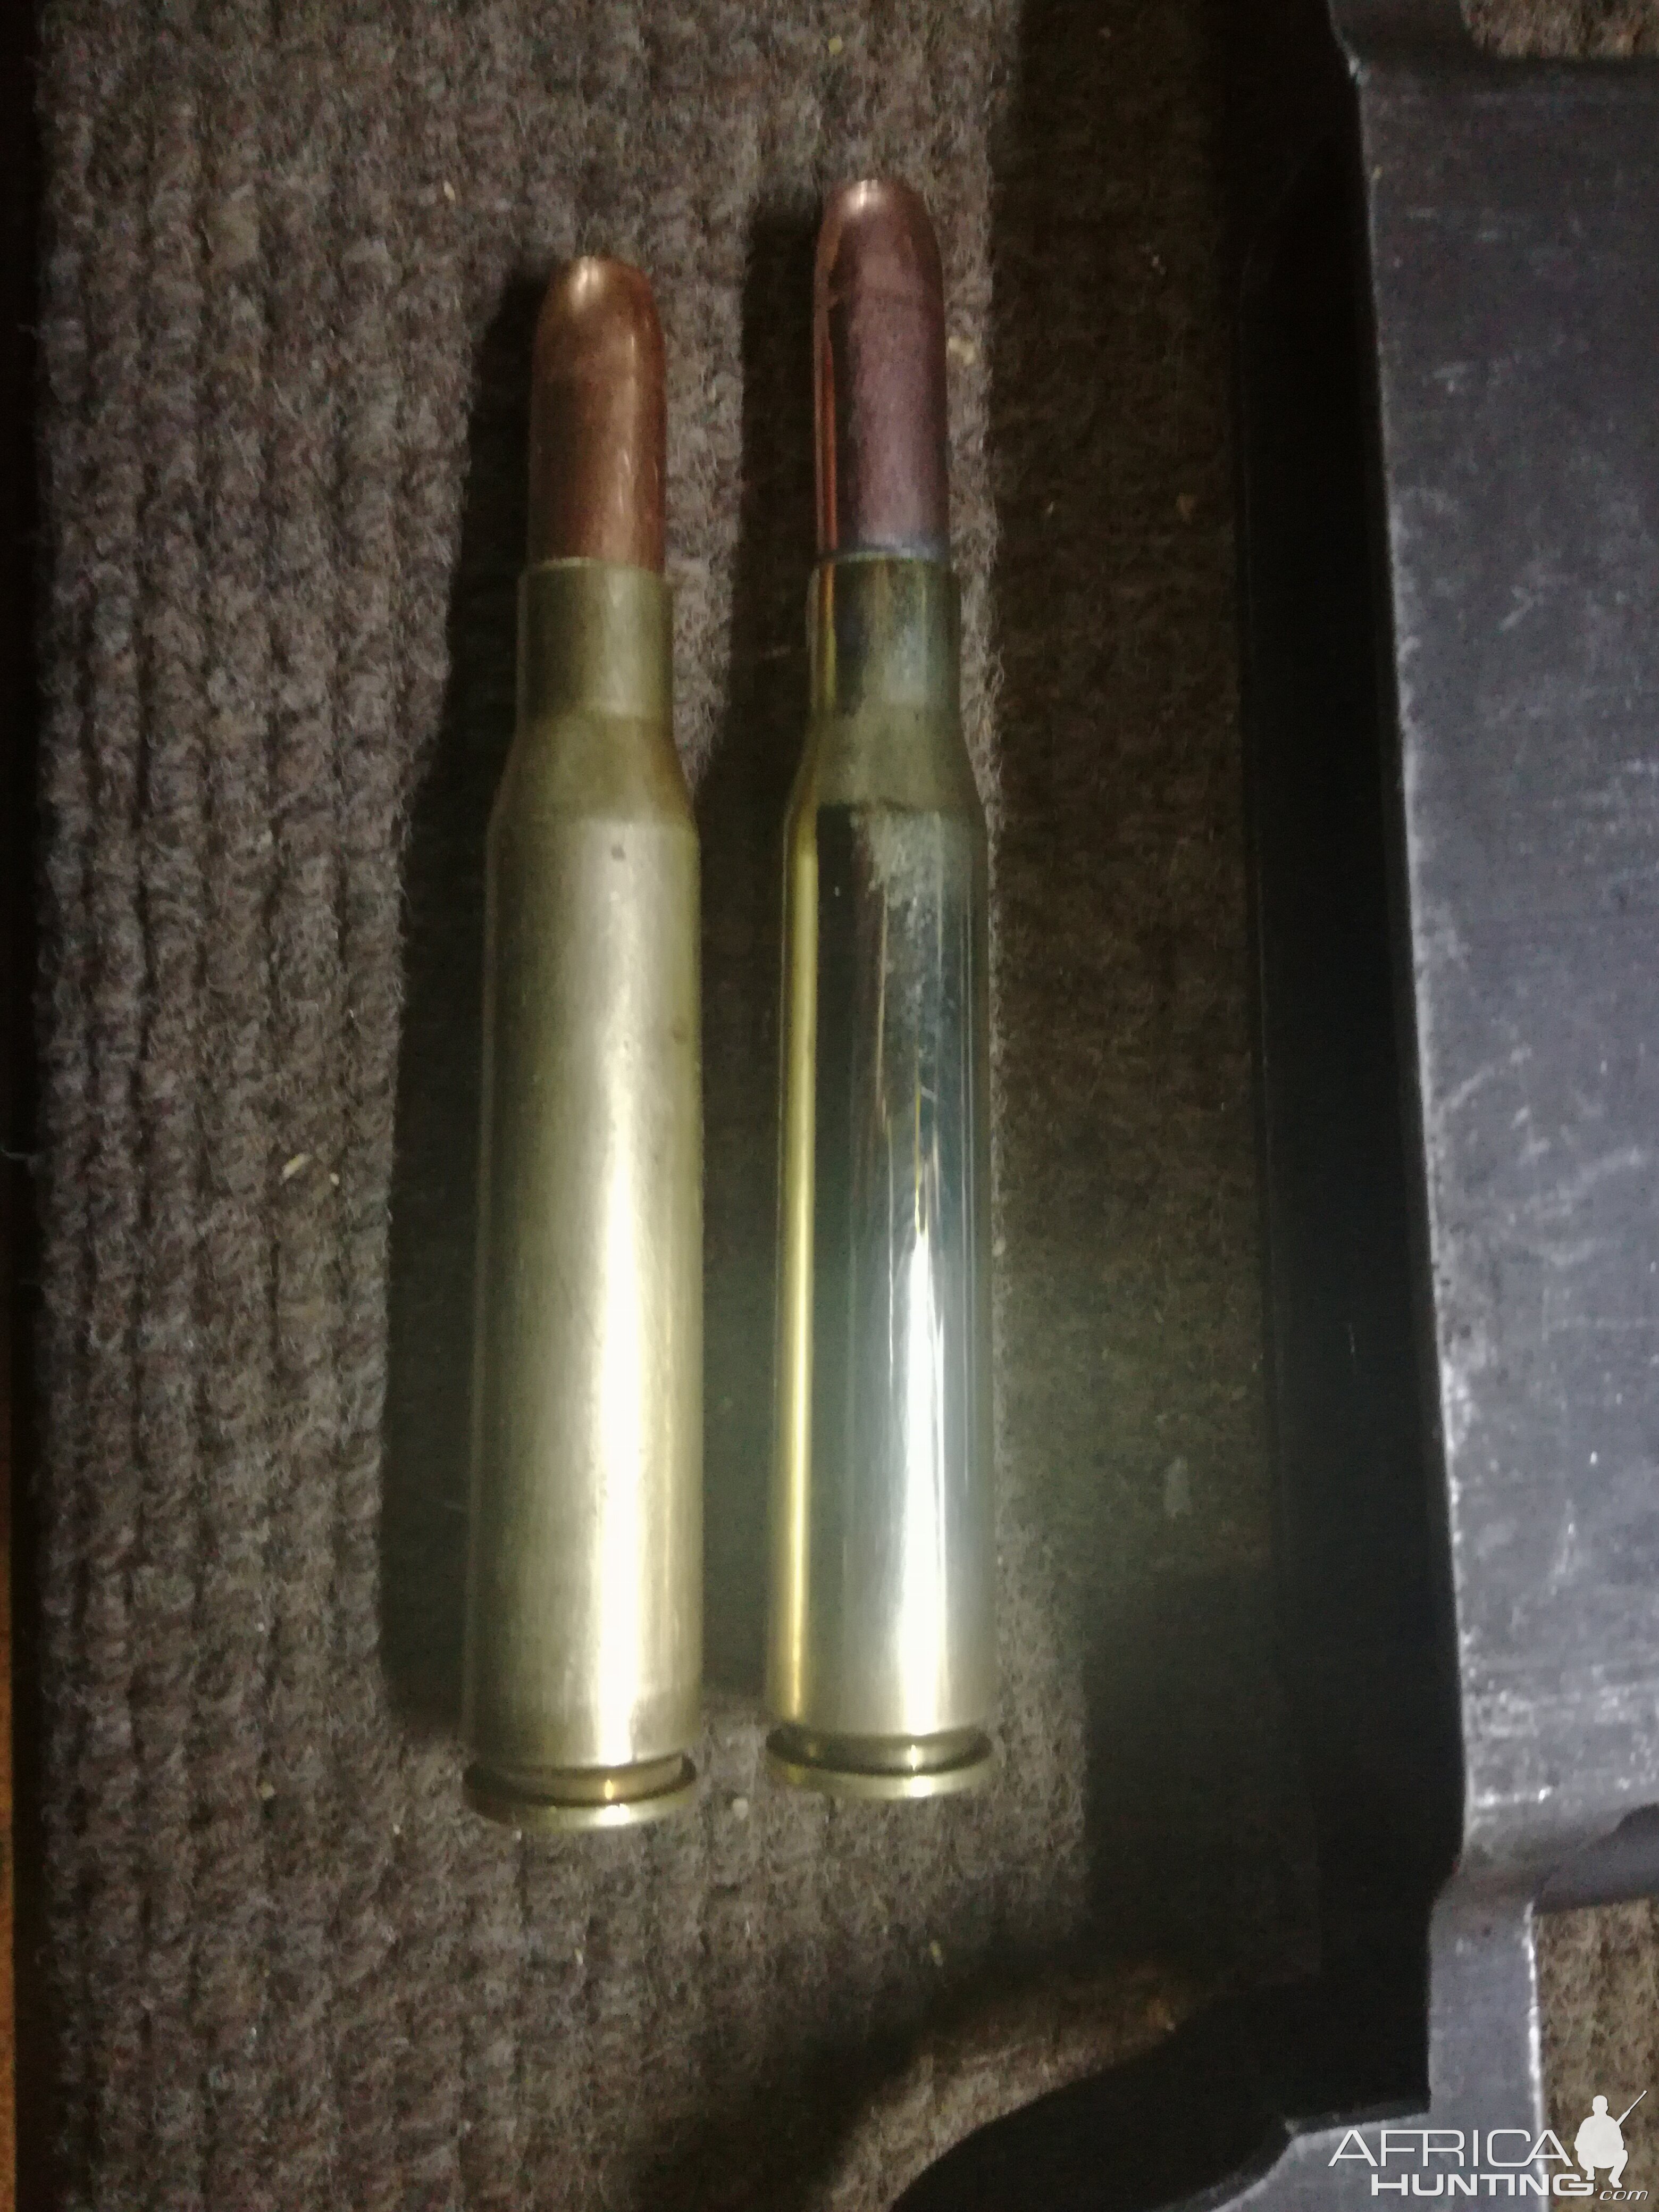 91 mm round alongside a 87 mm round..dummies both of them..